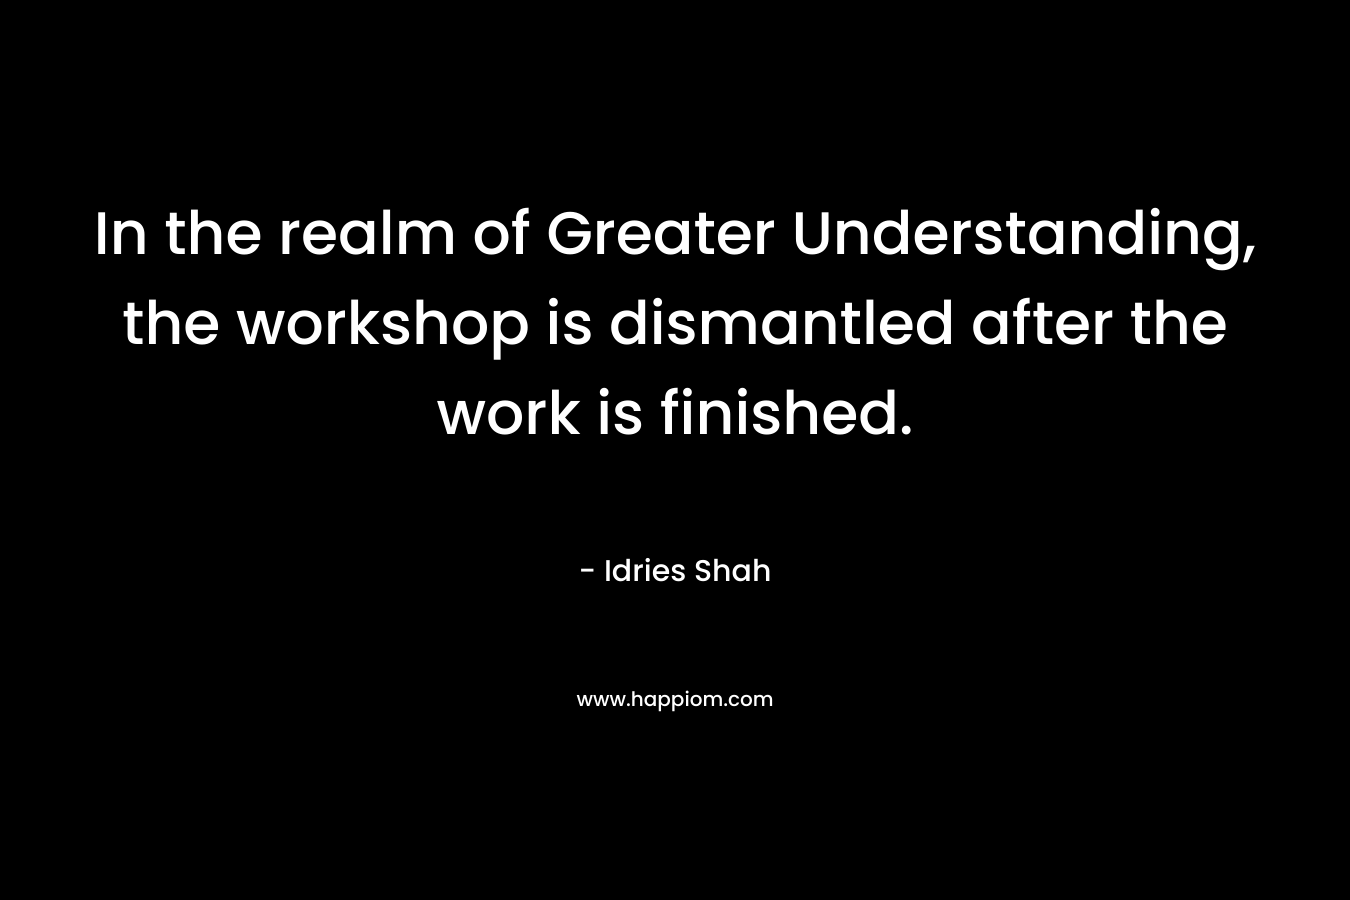 In the realm of Greater Understanding, the workshop is dismantled after the work is finished.